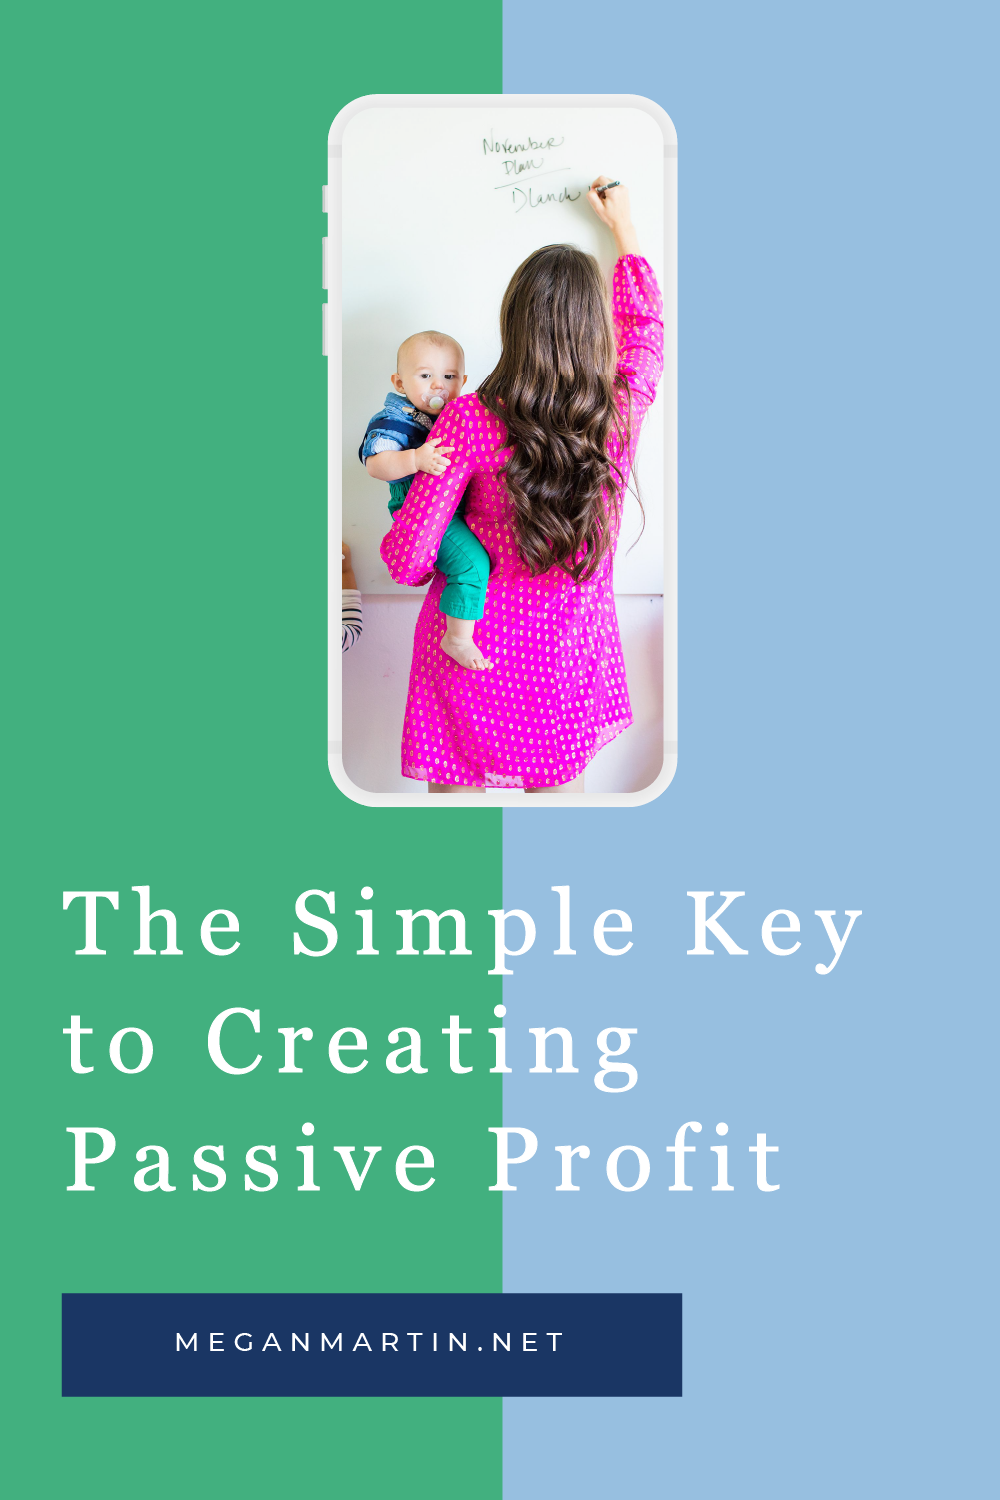 How to get started creating passive profit so you can take back your time and make money on auto-pilot